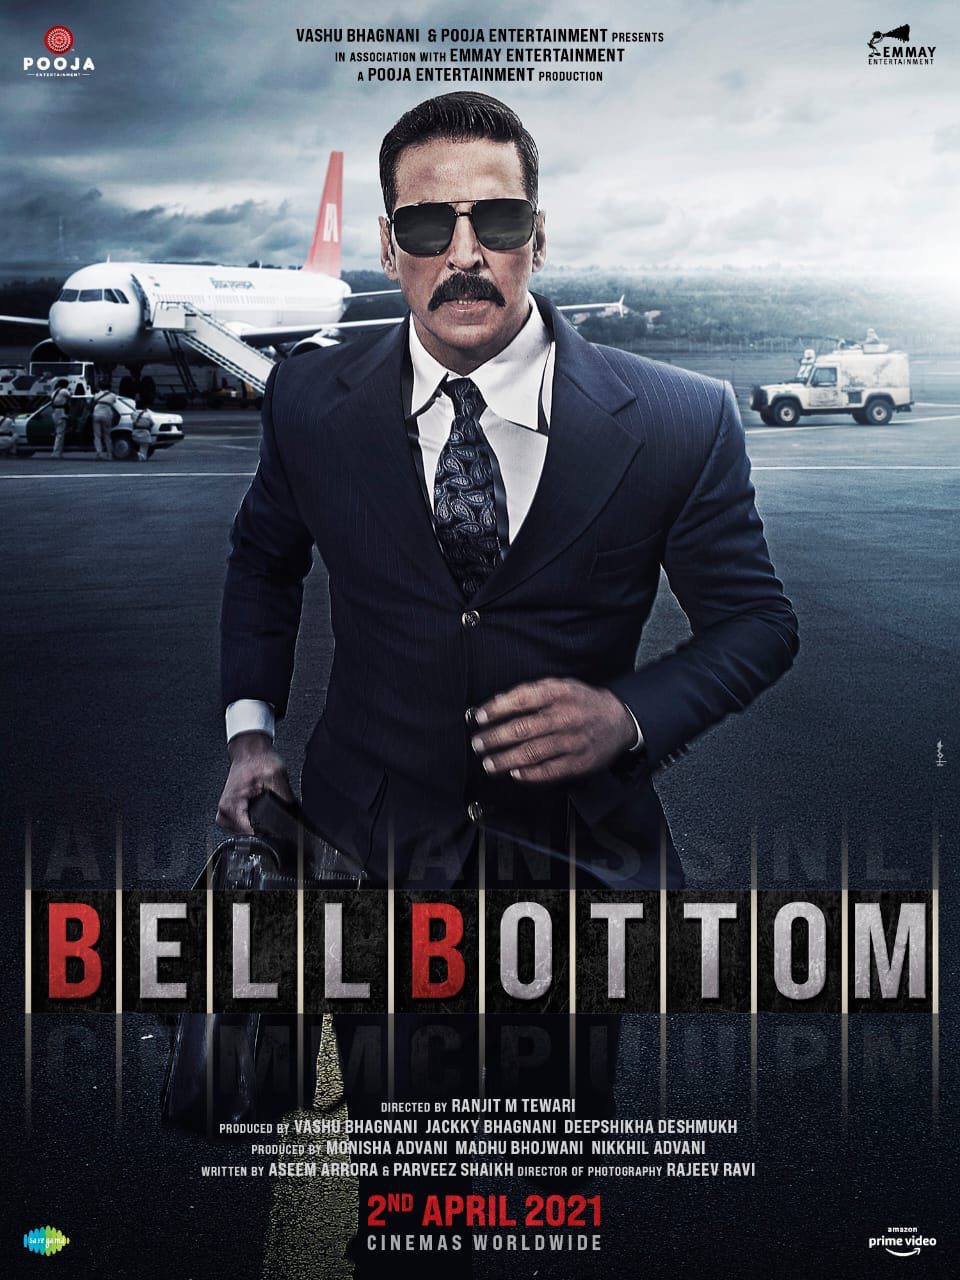 Bell Bottom Shooting Completed Release Date April 02